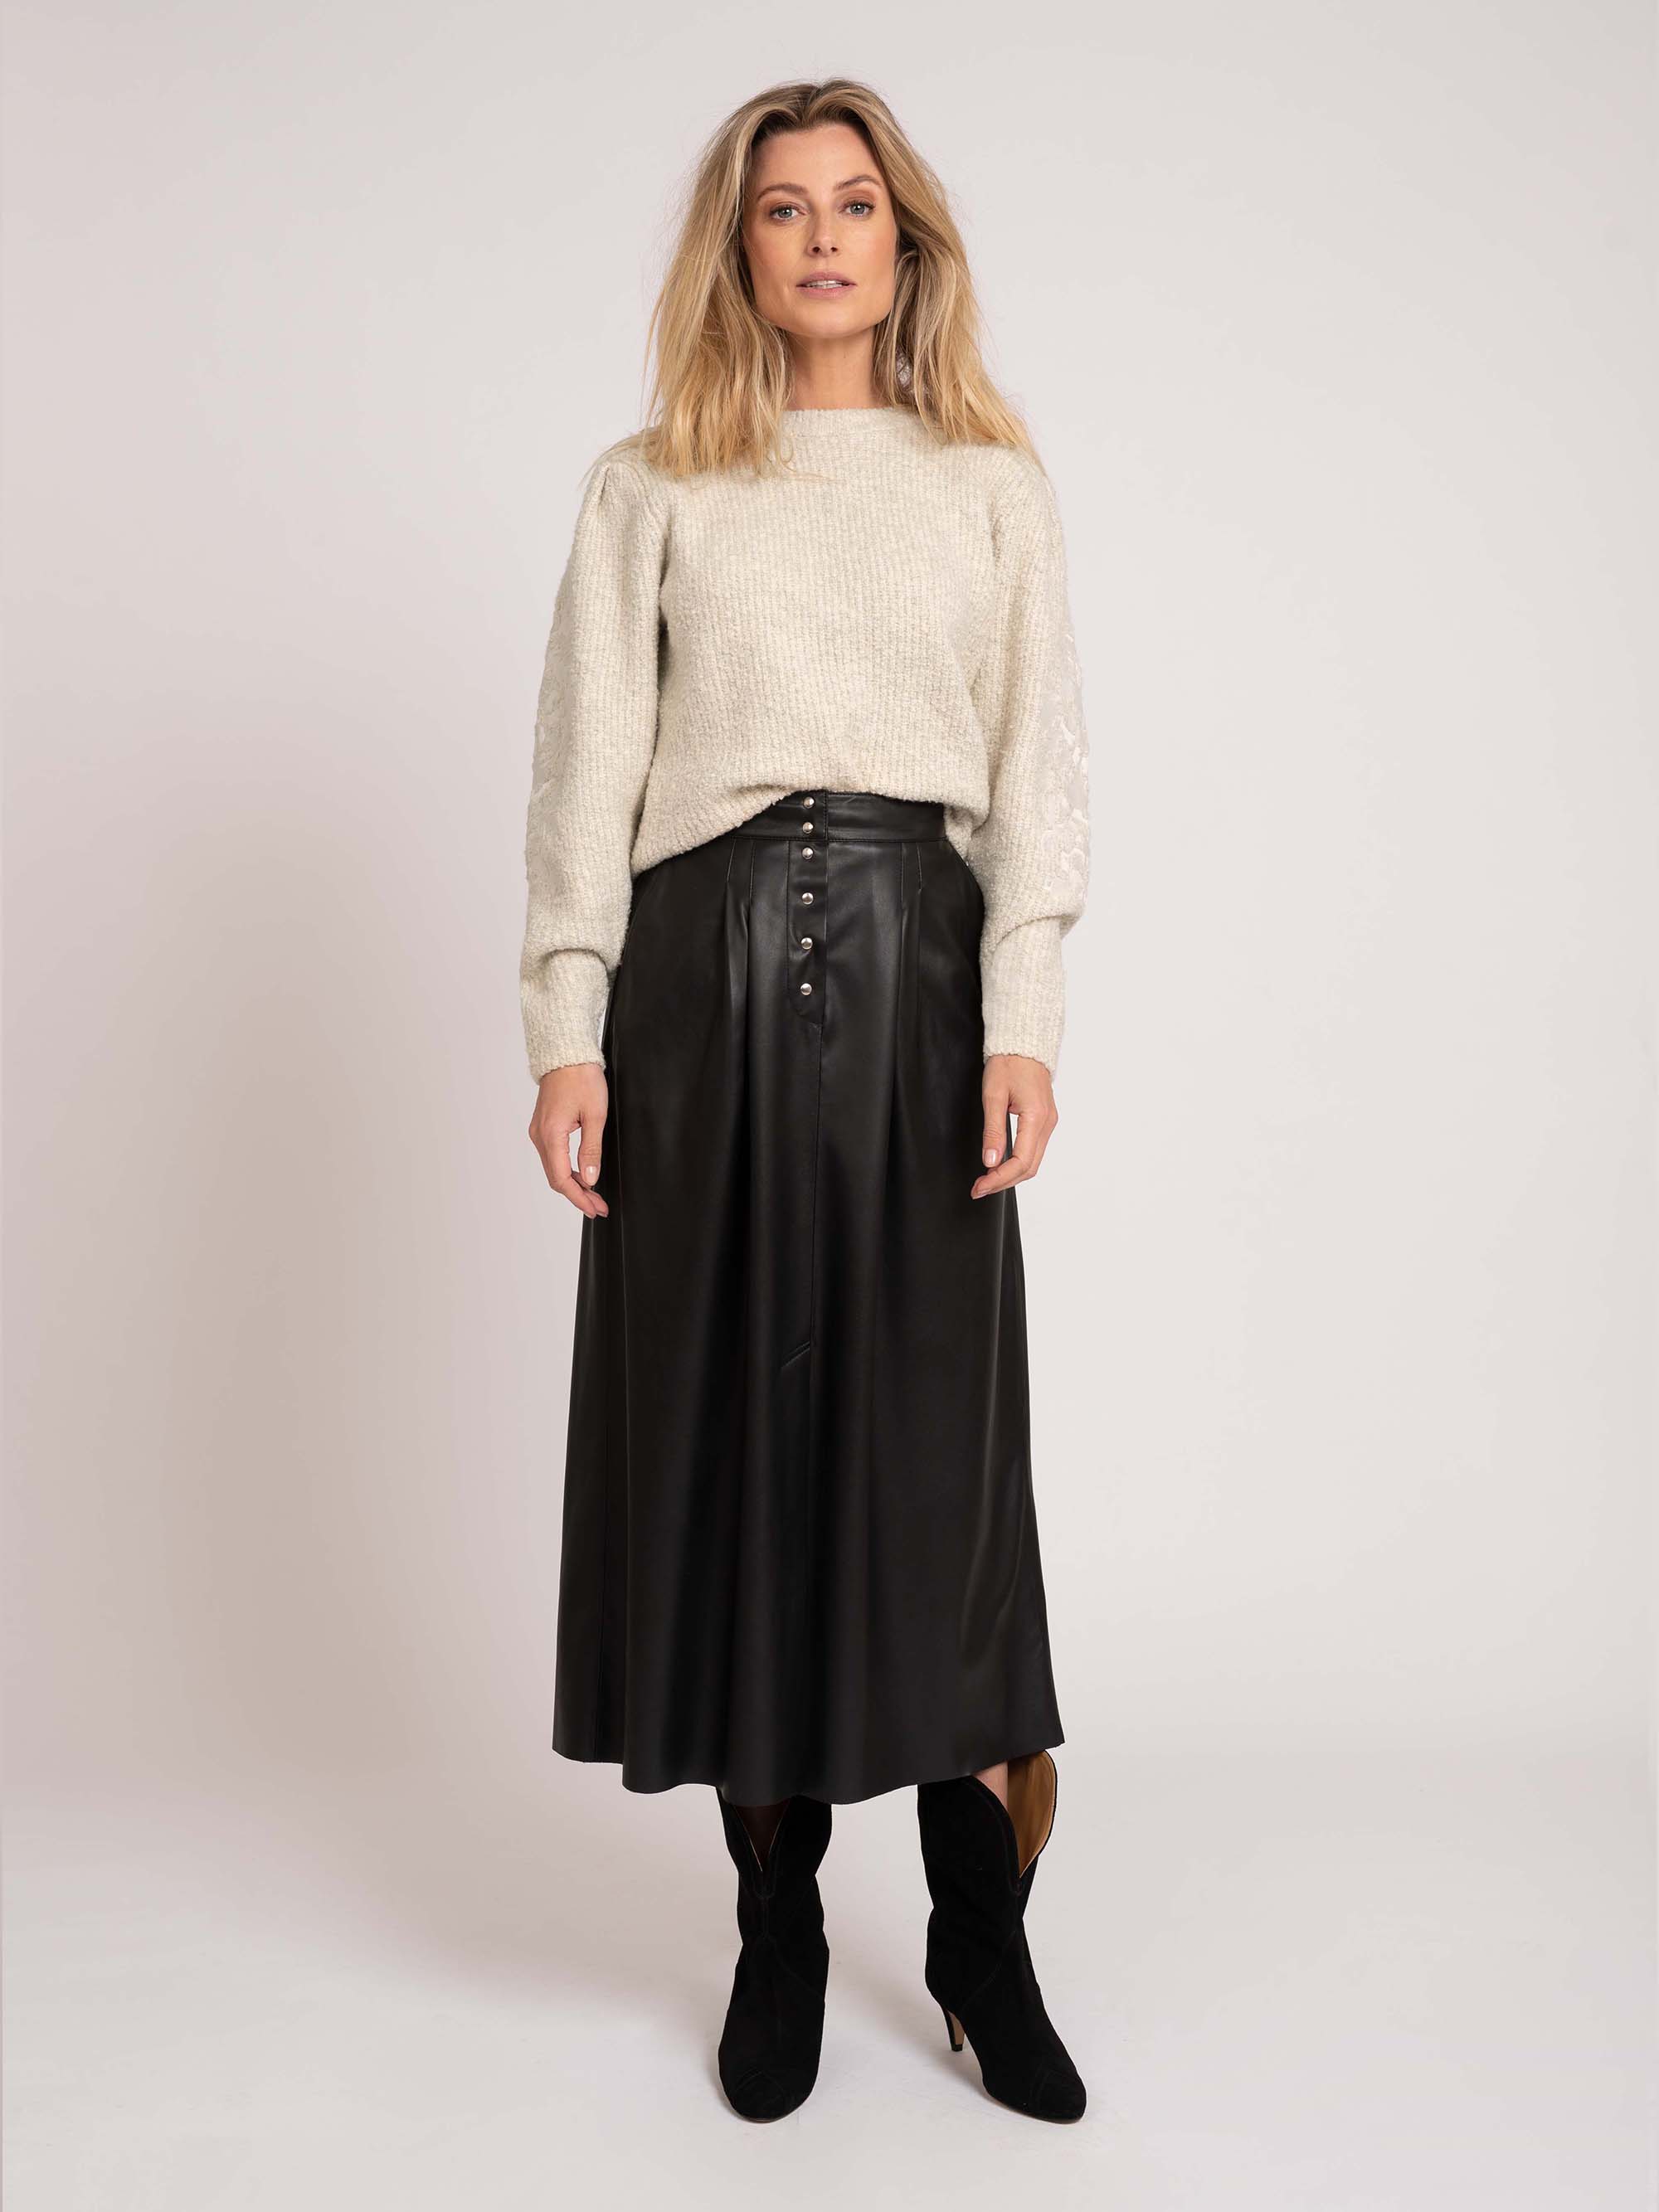 Vegan leather maxi skirt with high rise